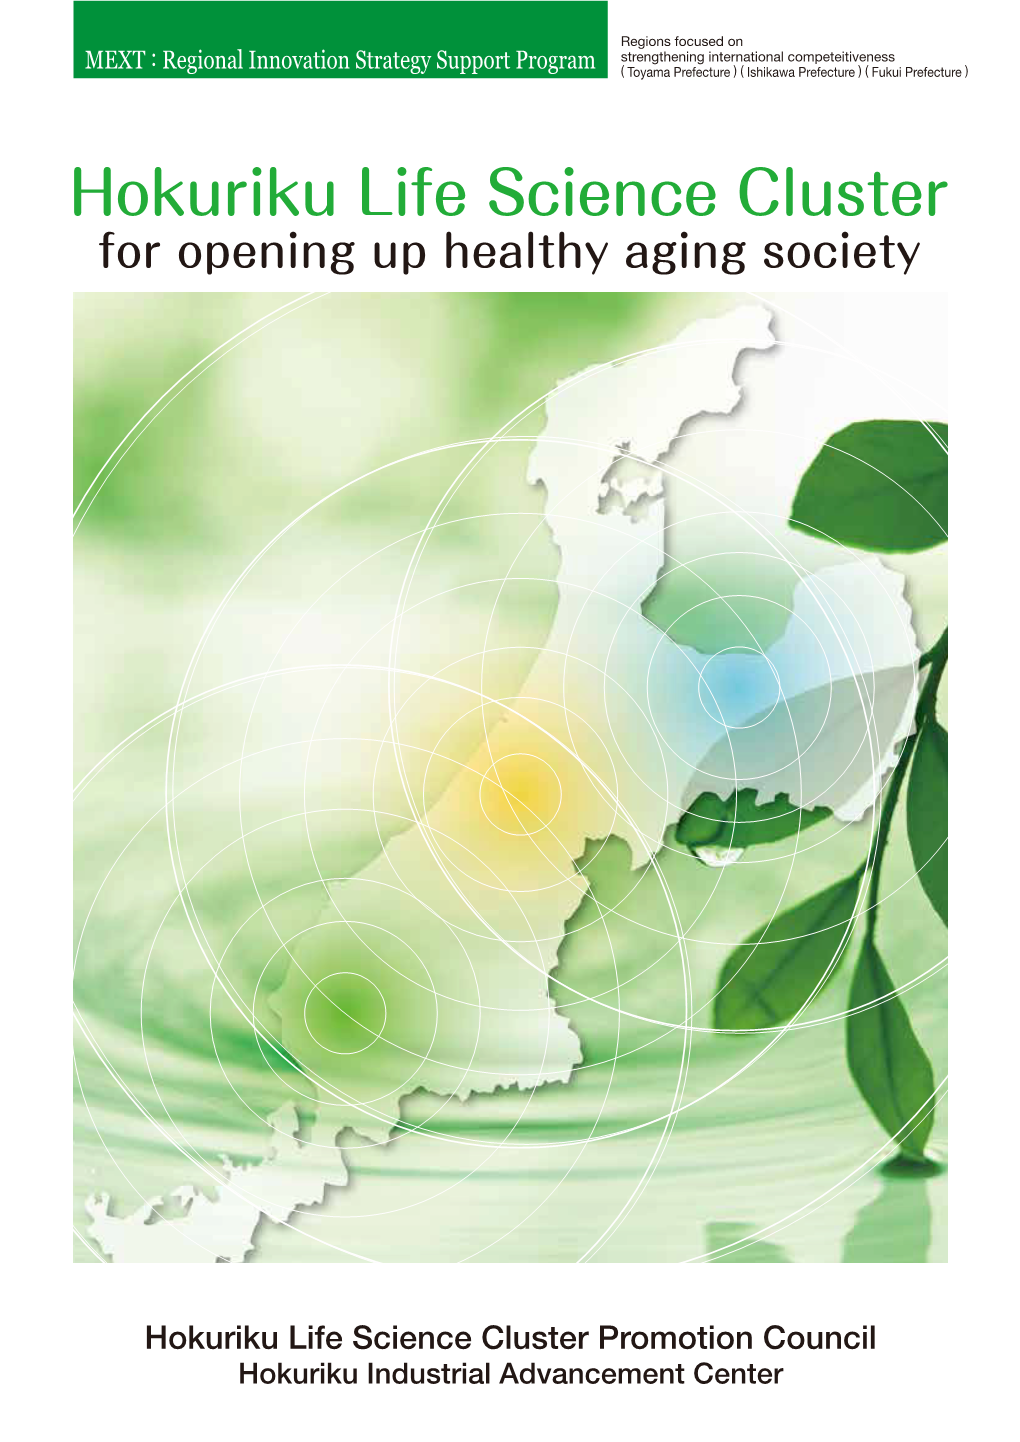 Hokuriku Life Science Cluster for Opening up Healthy Aging Society